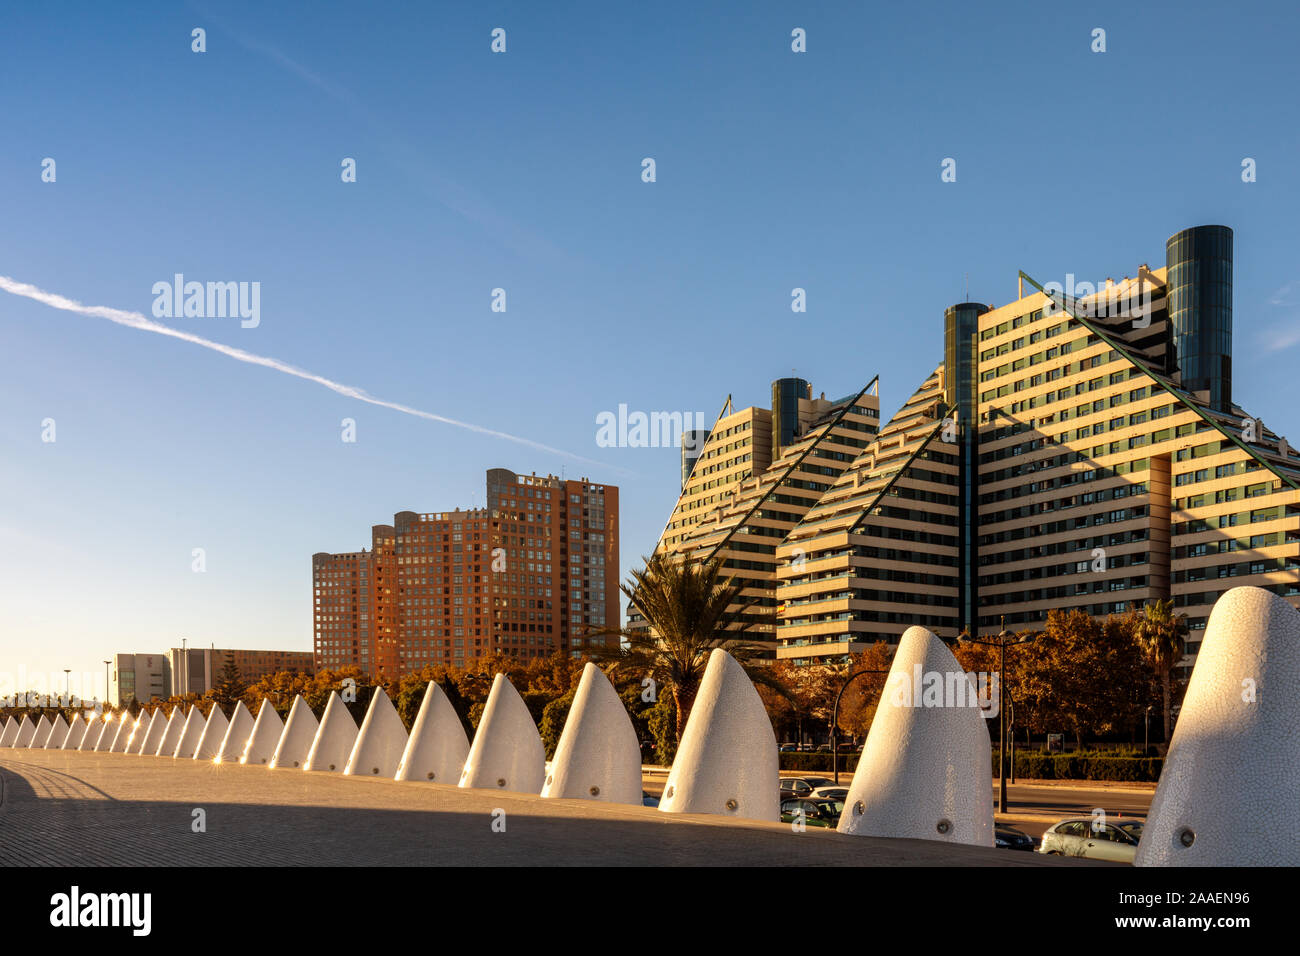 Contemporary multistory buildings near the City of Arts and Sciences, Valencia, Spain. Stock Photo